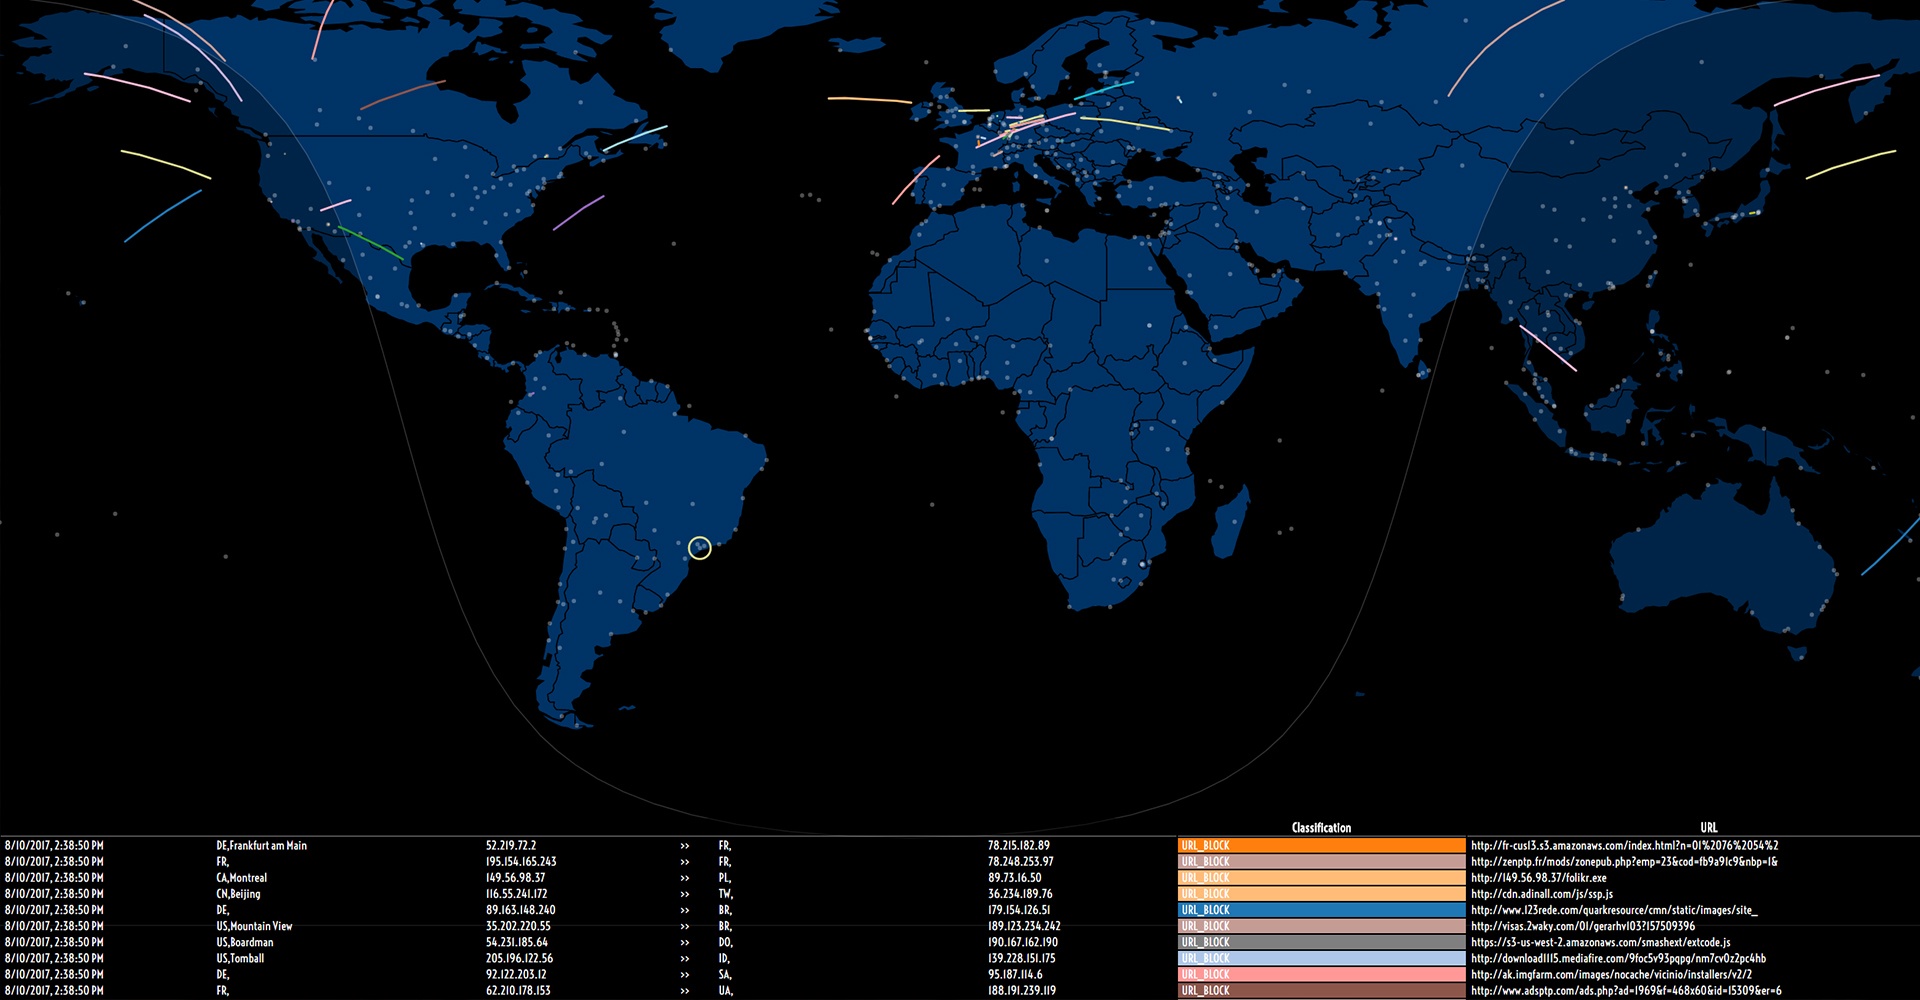 Live cyber attack map indonesia